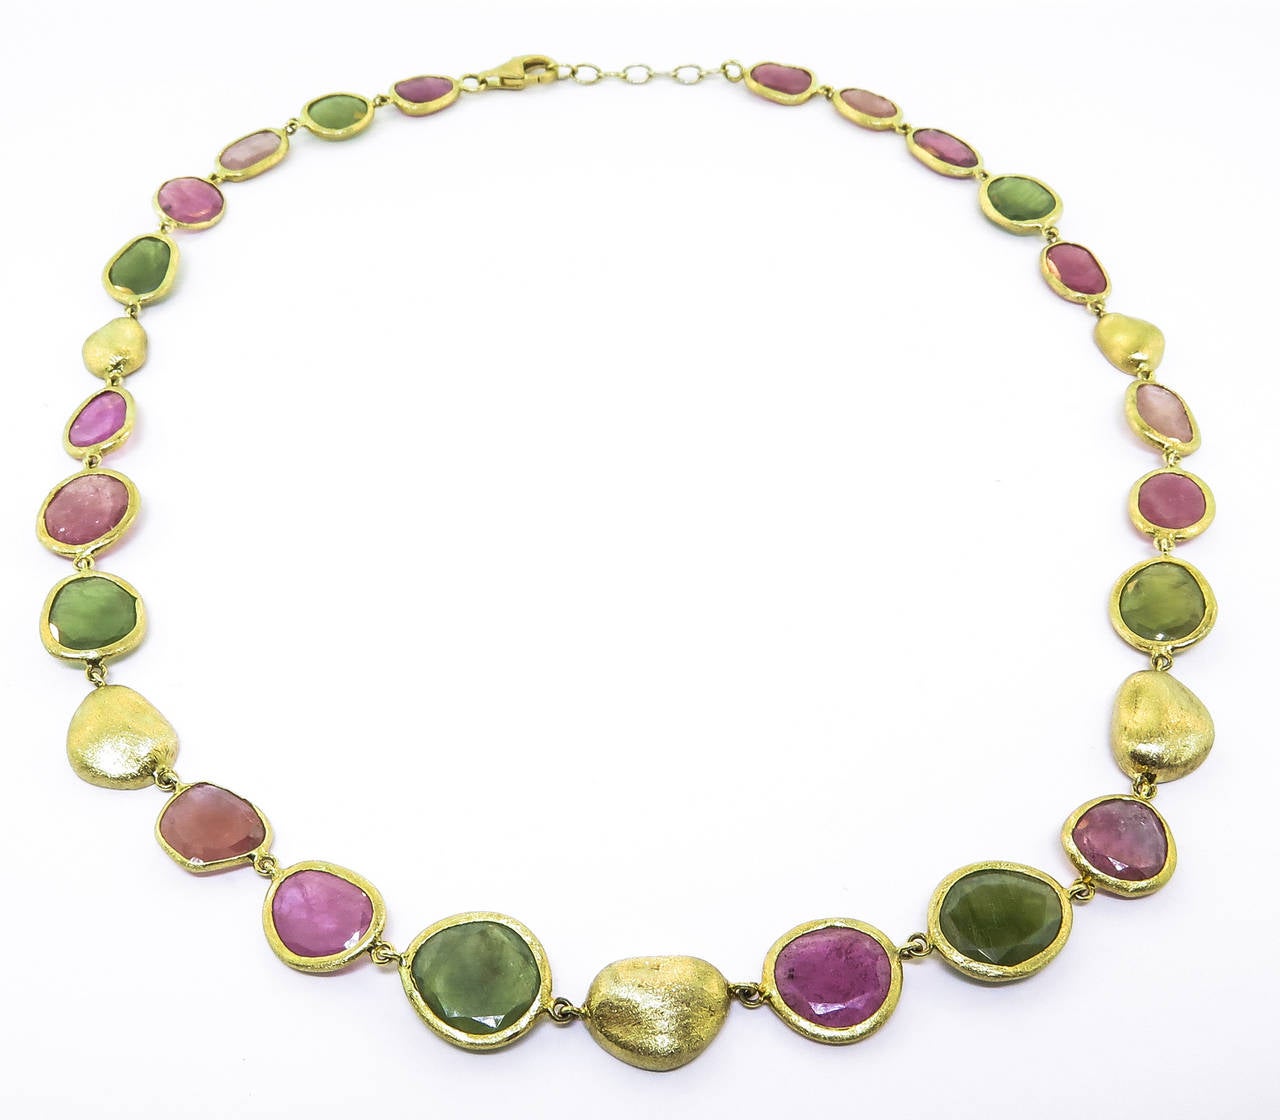 76 Carats of natural sapphire slices in vibrant colors shine in this beautiful necklace by Yvel.  Handcrafted in Israel, this necklace is a great addition to any ensemble!